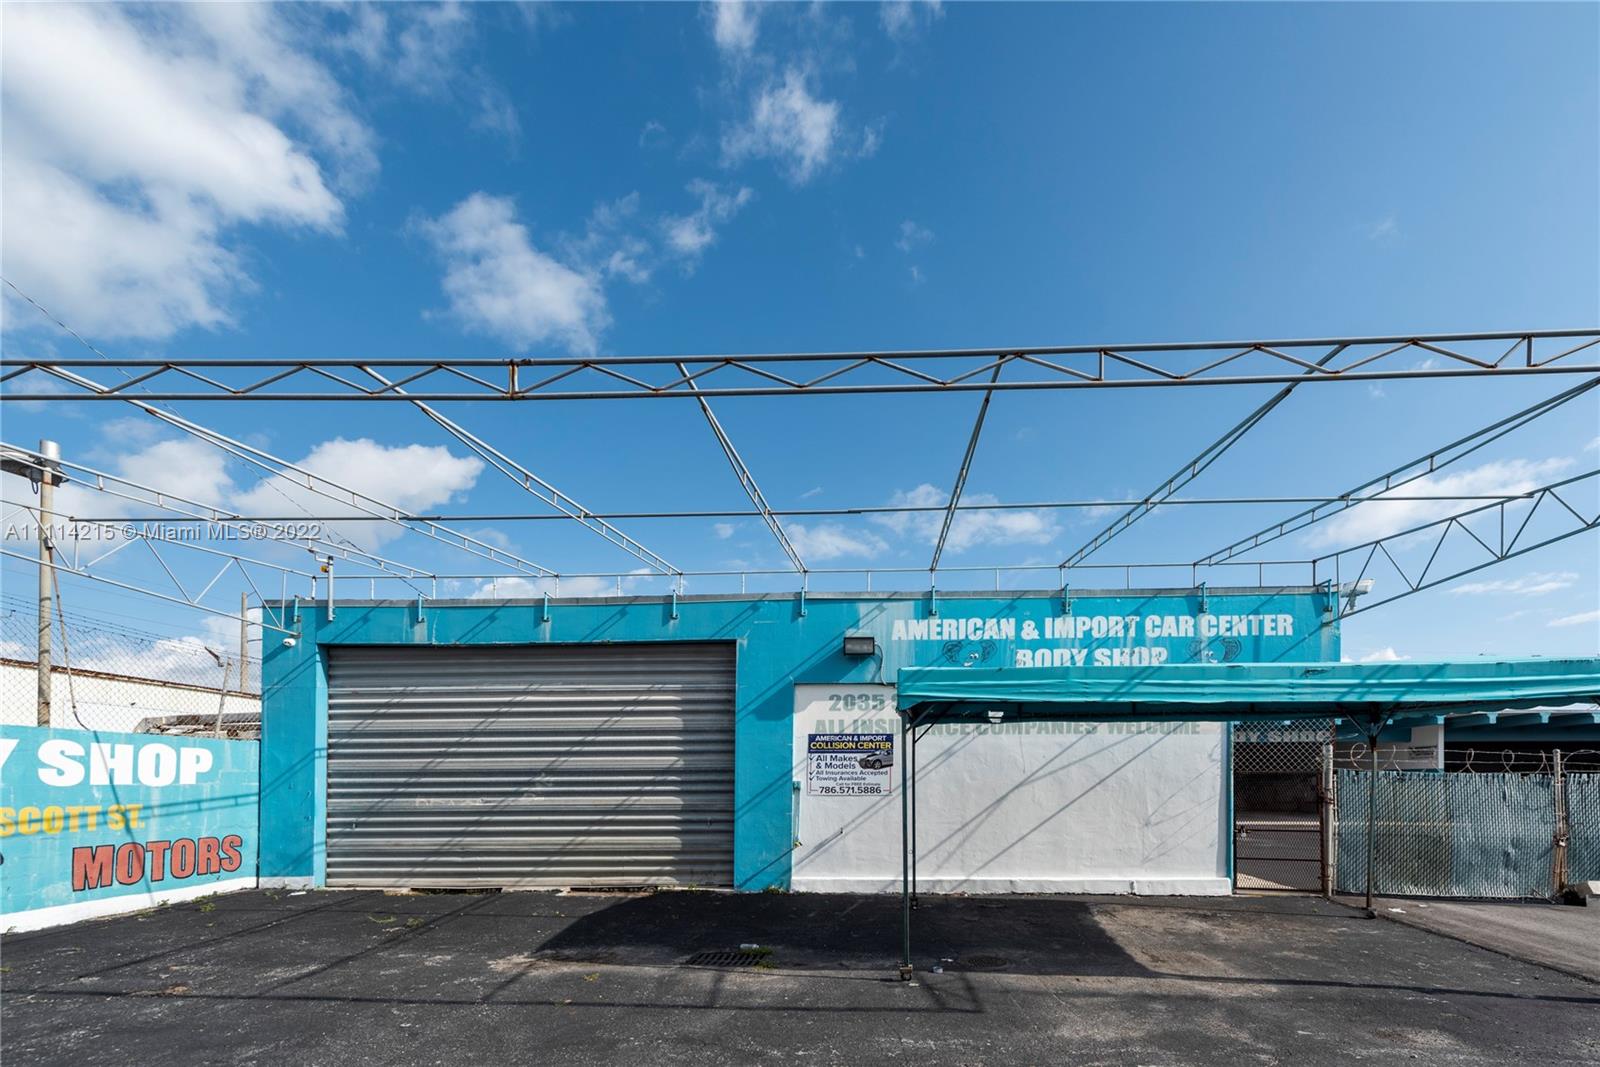 Excellent opportunity to lease an 11,000 SF distribution center. All business collision equipment is conveyed including two paint booths, one for commercial vehicles.
A large additional lot to the west is also available.